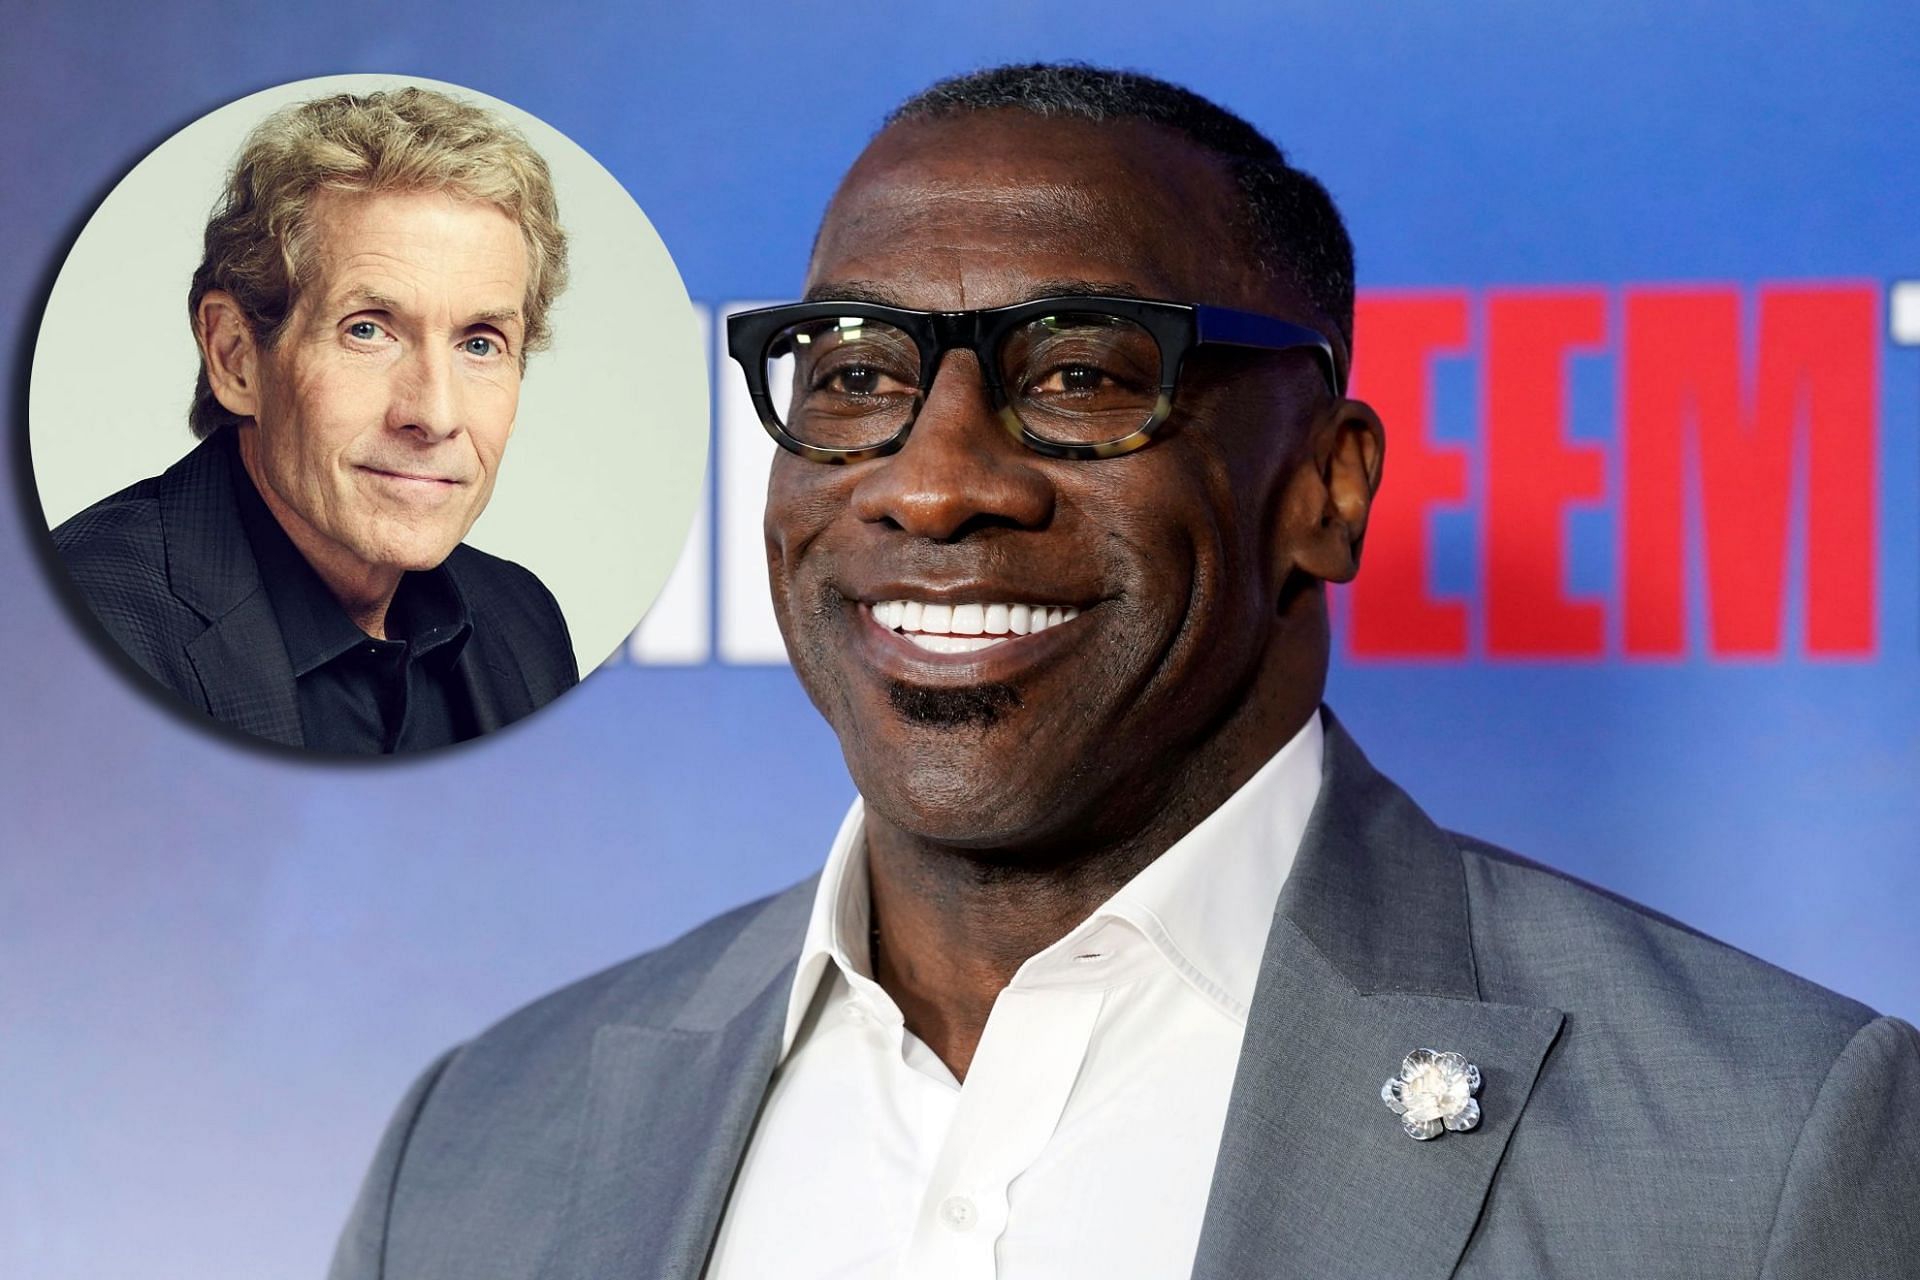 Shannon Sharpe talks about his relationship with Skip Bayless